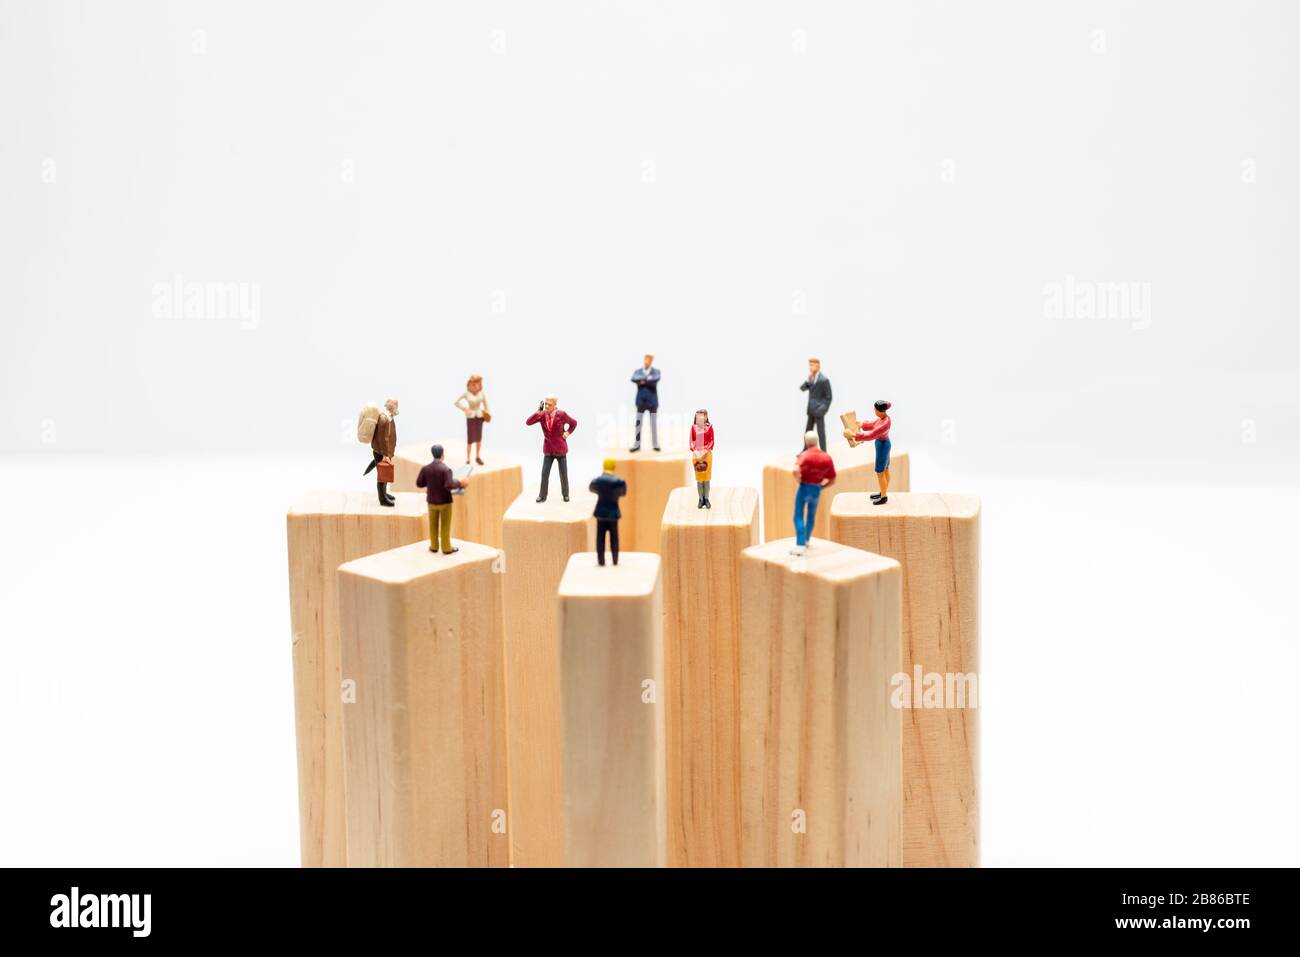 Miniature toys standing on wooden block - social distancing, anti-social or team work concept. Stock Photo